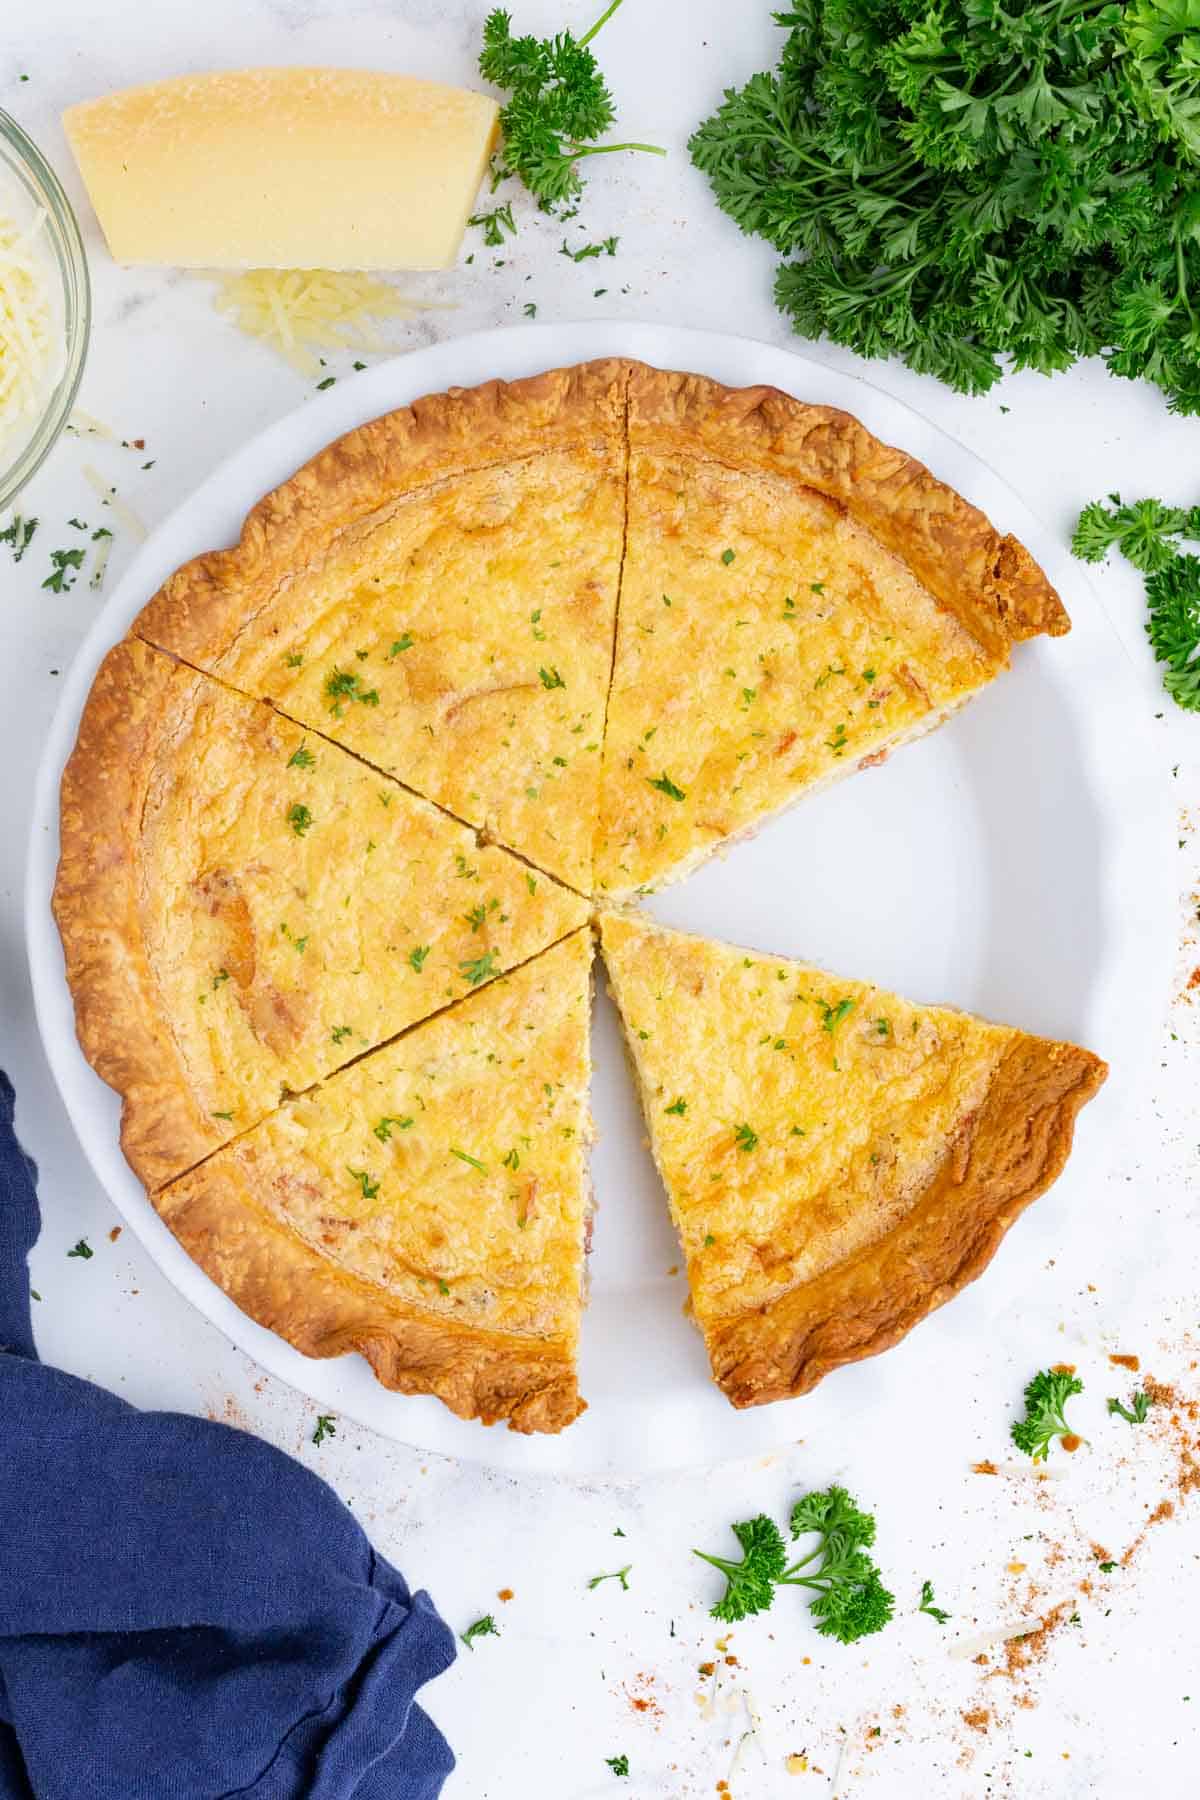 A Quiche Lorraine is sliced before serving.